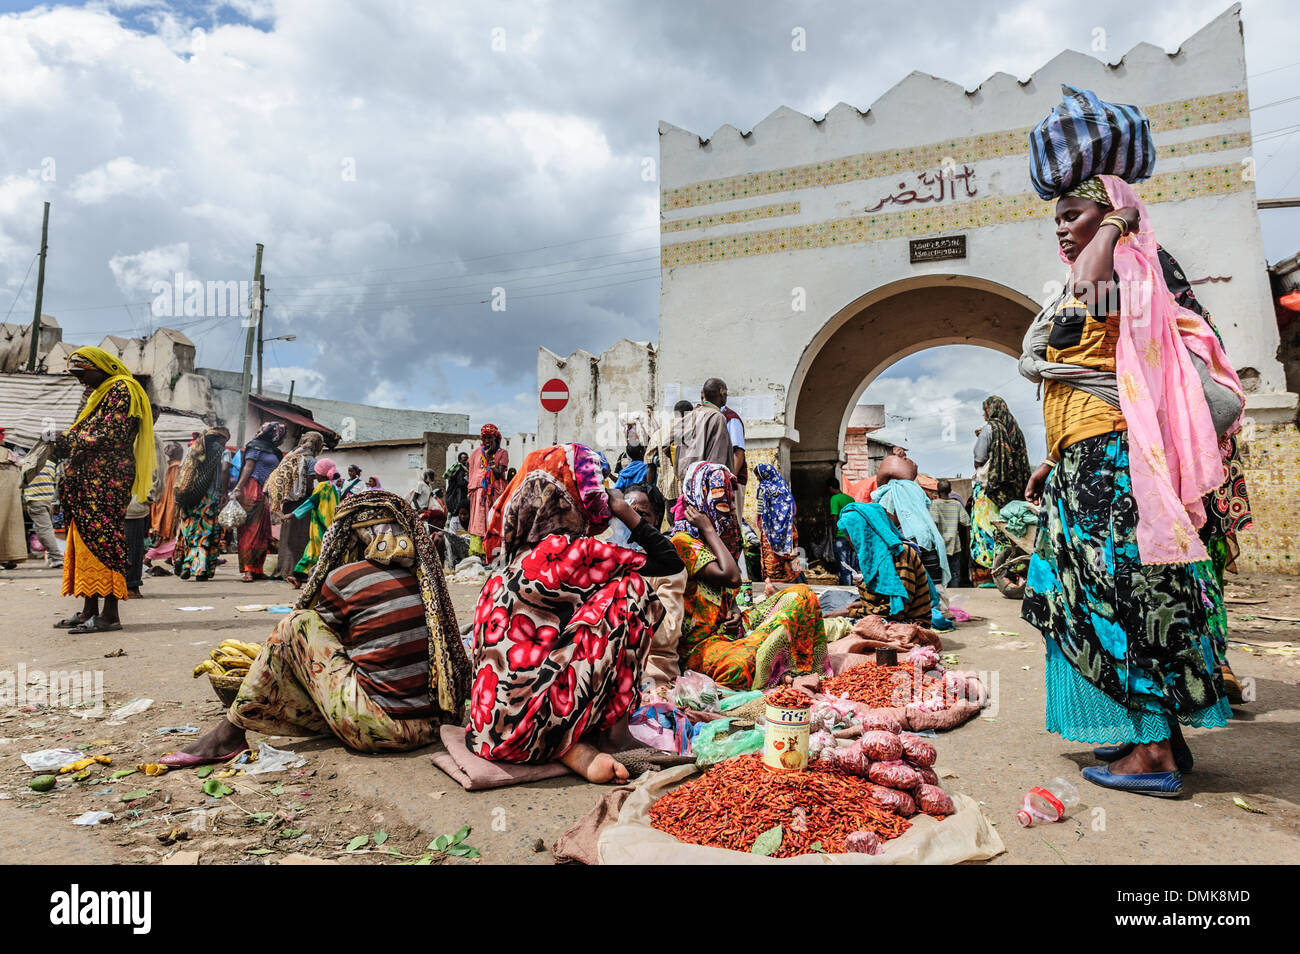 Street market in front of Showa gate, Harar, Ethiopia, Africa Stock Photo